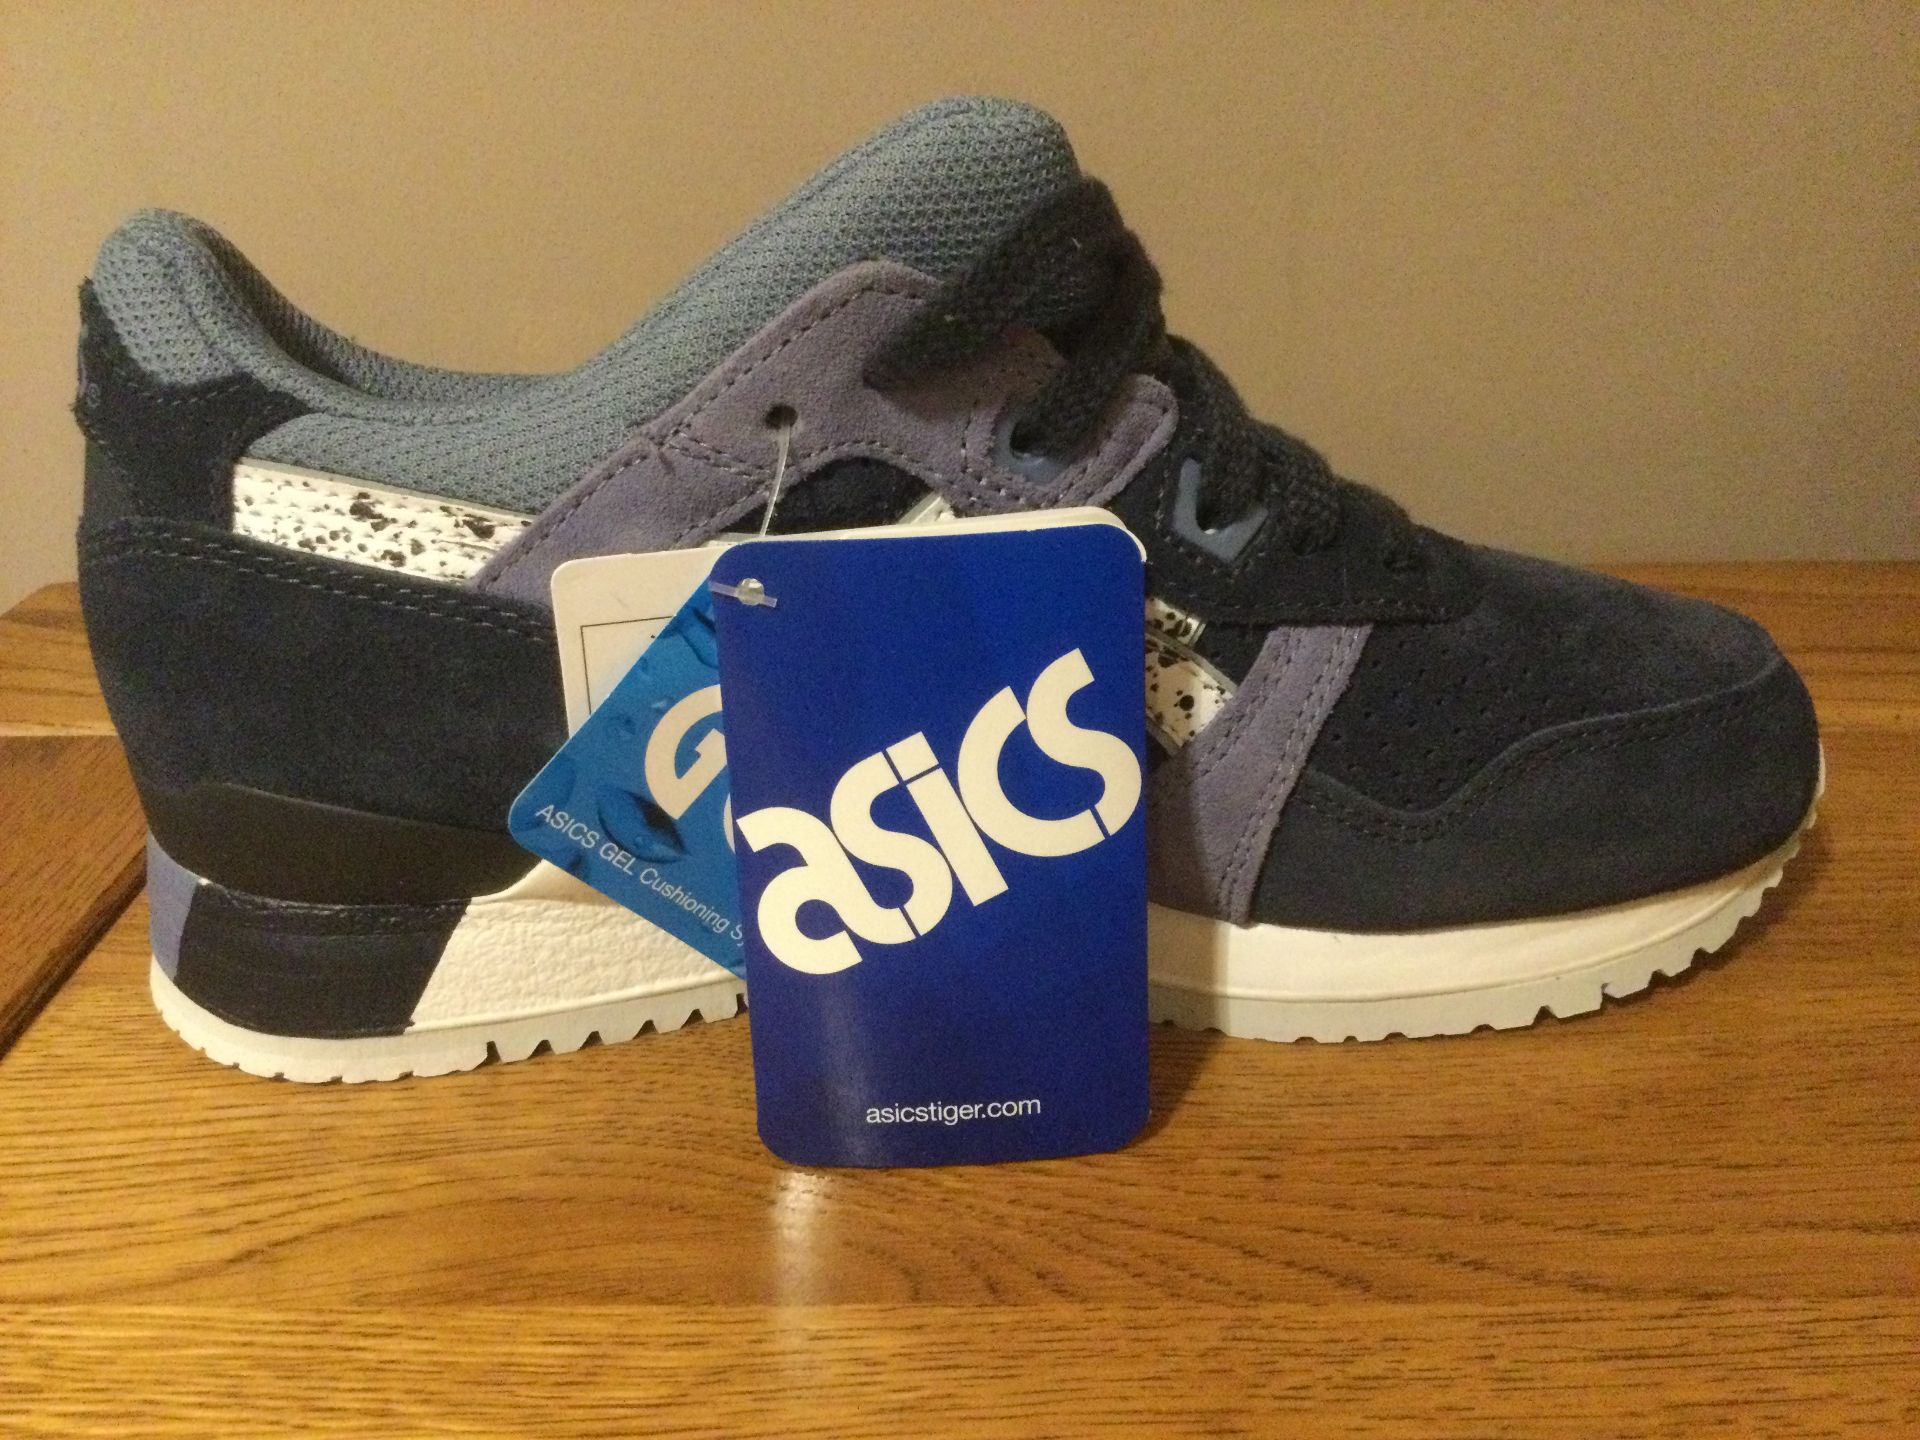 ASICS Gel-Lyte III, Ladies Trainers, Indian Ink, Size 3 - New RRP £95.00 - Image 4 of 7